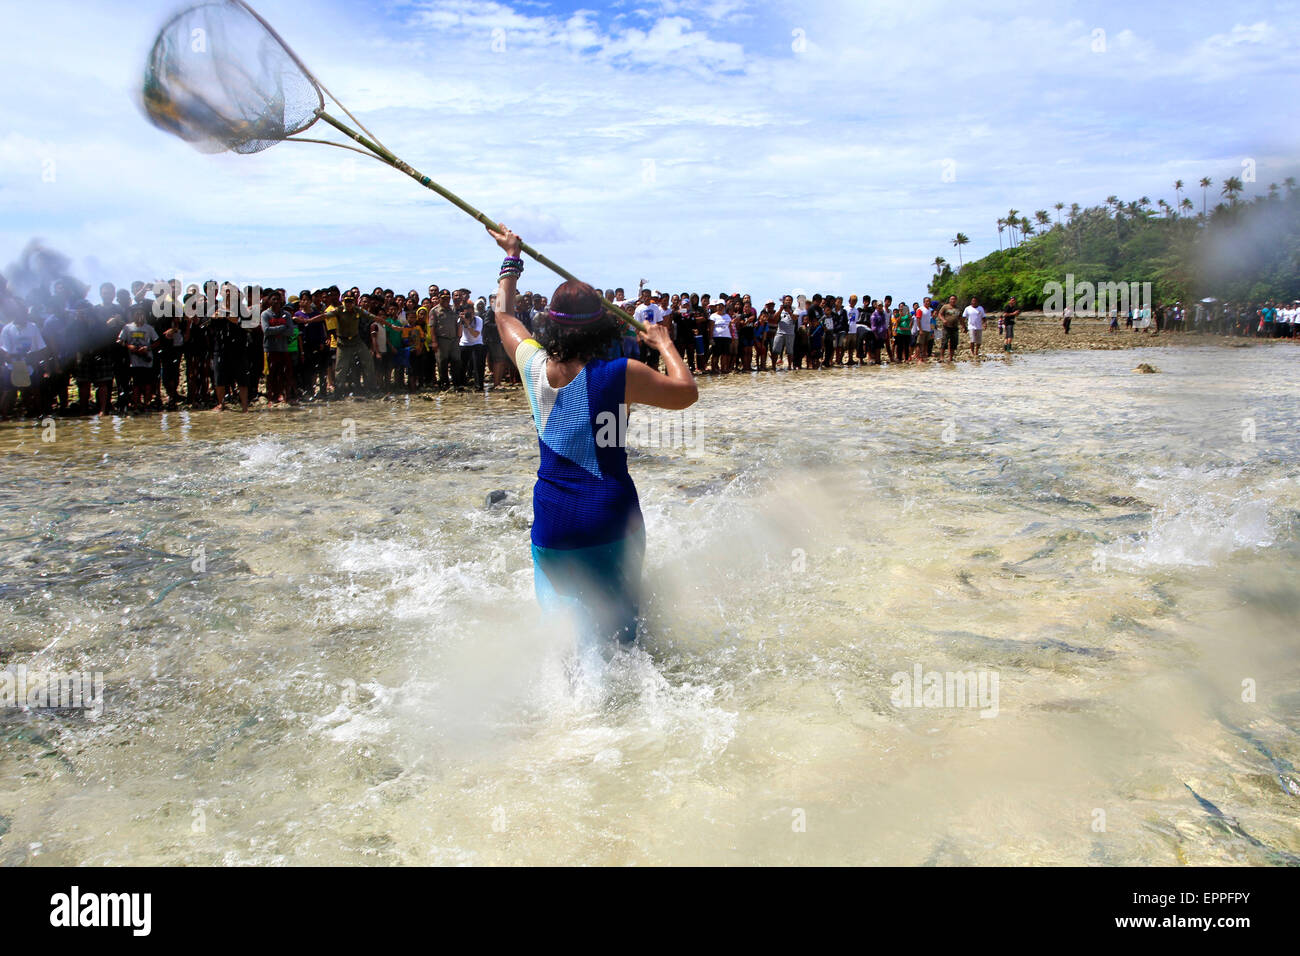 Sangihe, Indonesia. 07th May, 2015. Thousands of people on the island Intata, which is bordered by the Philippines, following the ritual caught fish called mane'e. Tens of thousands of fish called up by means of rituals, then locked using coconut oil, when the lowest tides of the year, the fish and caught together. This tradition has existed since hundreds of years ago, and continue to be held every year. © Ronny Adolof Buol/Pacific Pres/Alamy Live News Stock Photo